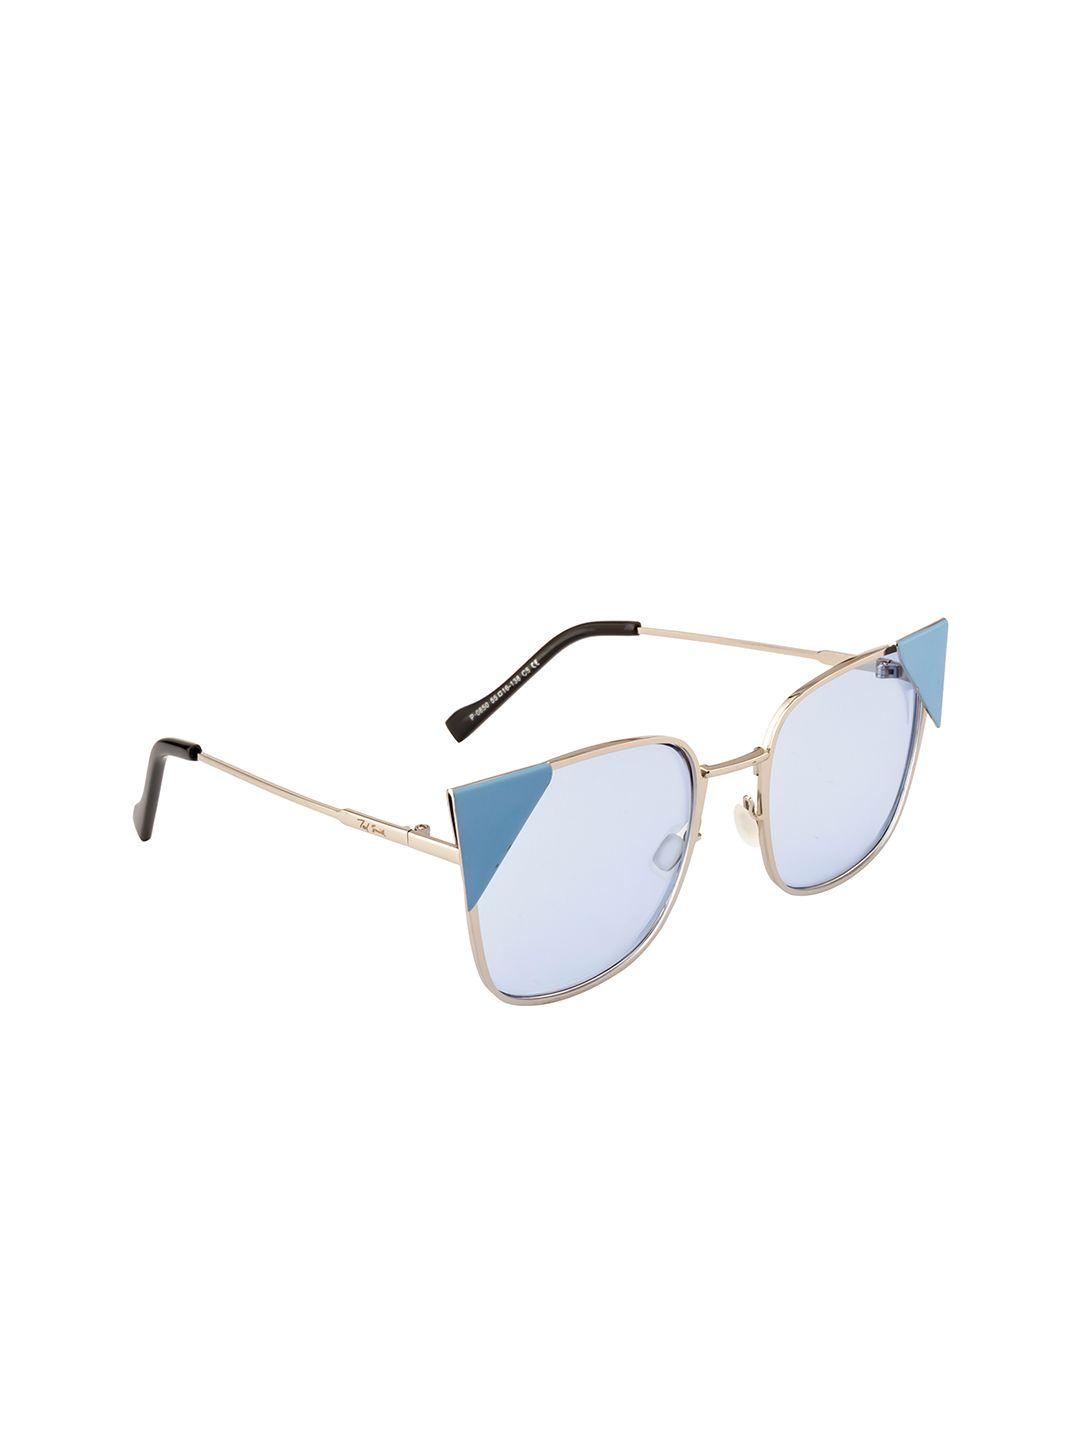 ted smith women blue lens & silver-toned cateye sunglasses with uv protected lens